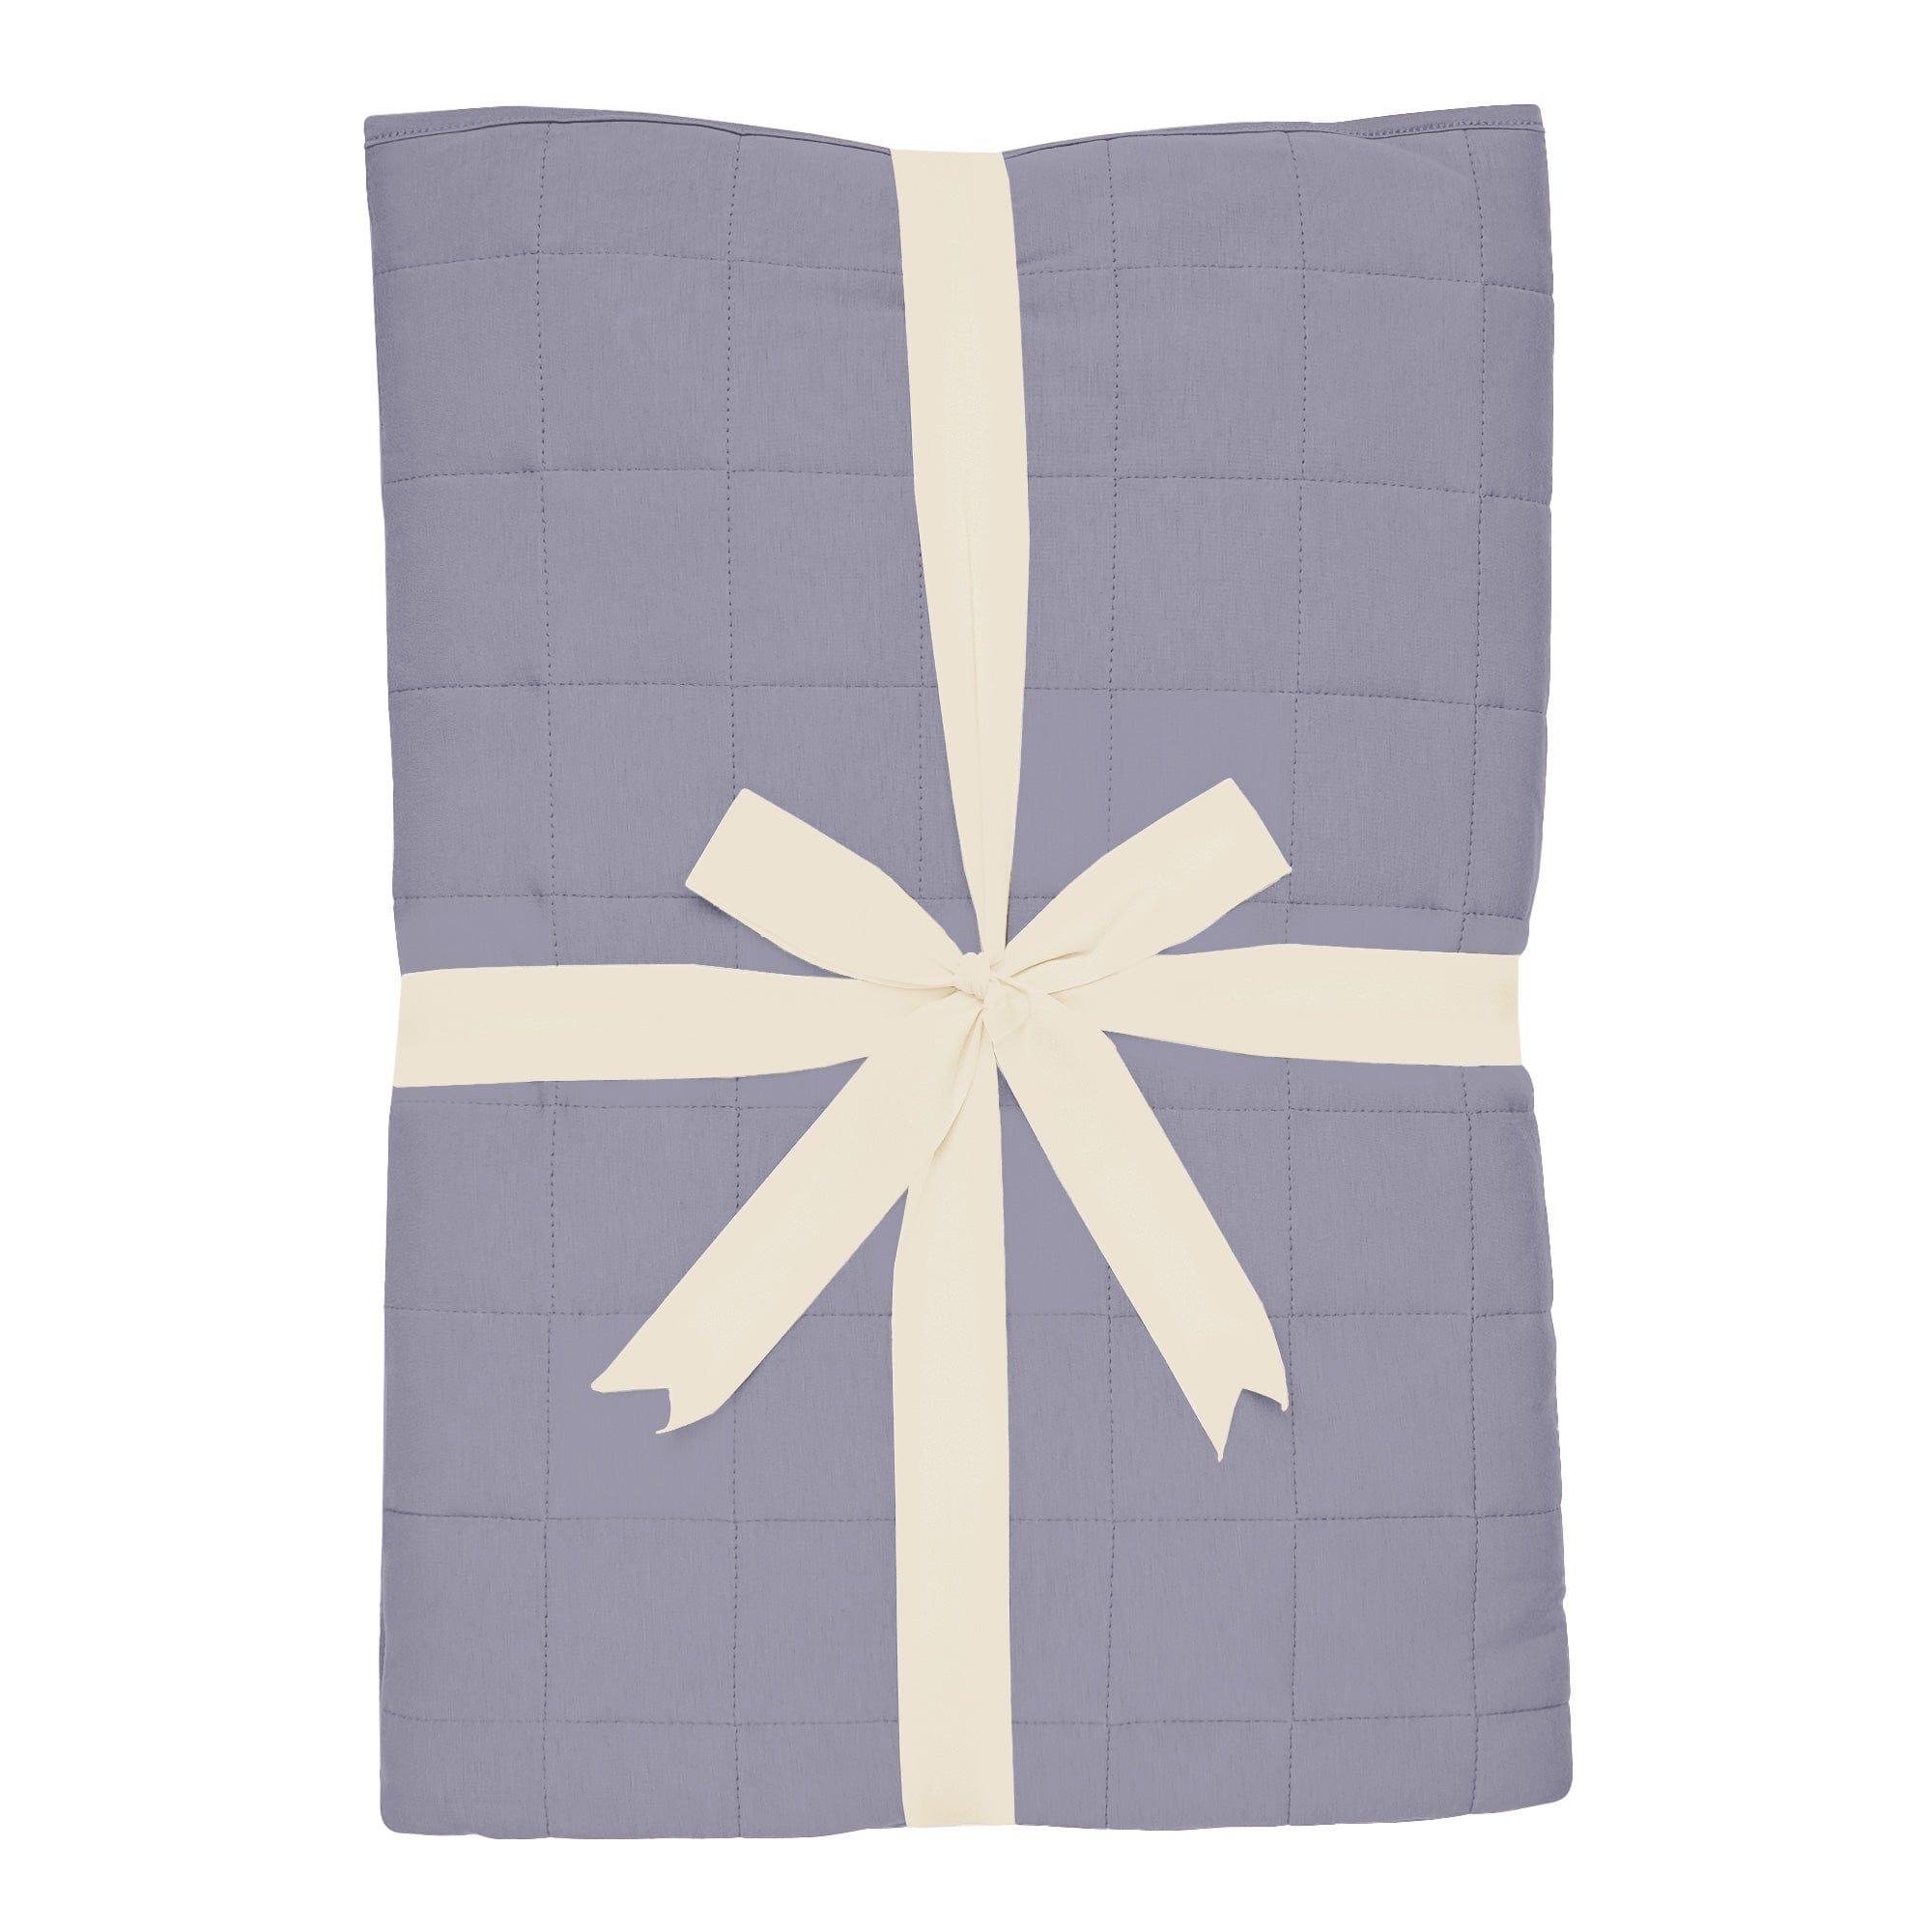 Kyte Baby Youth Blanket Haze / Youth Youth Blanket in Haze 2.5